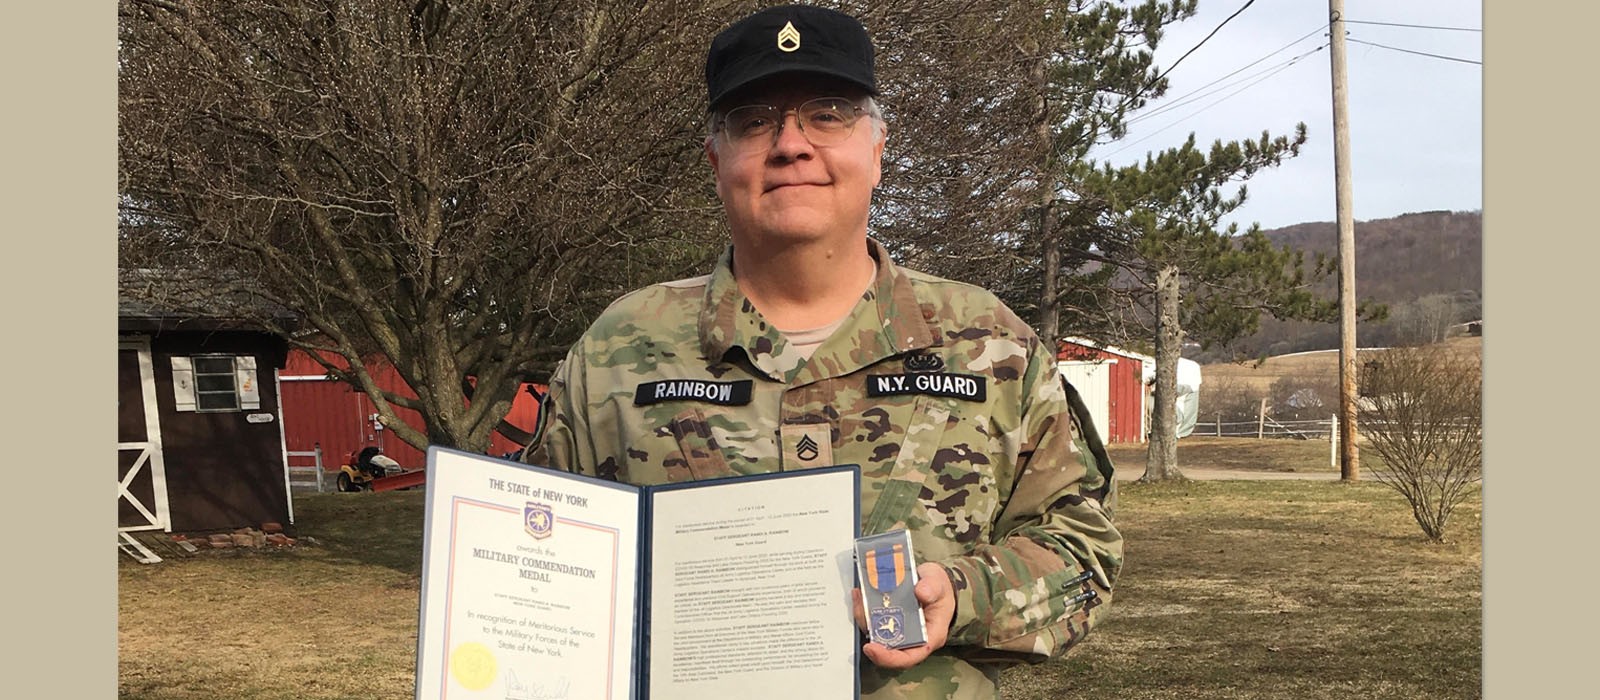 Randi Rainbow with Military Commendation Medal